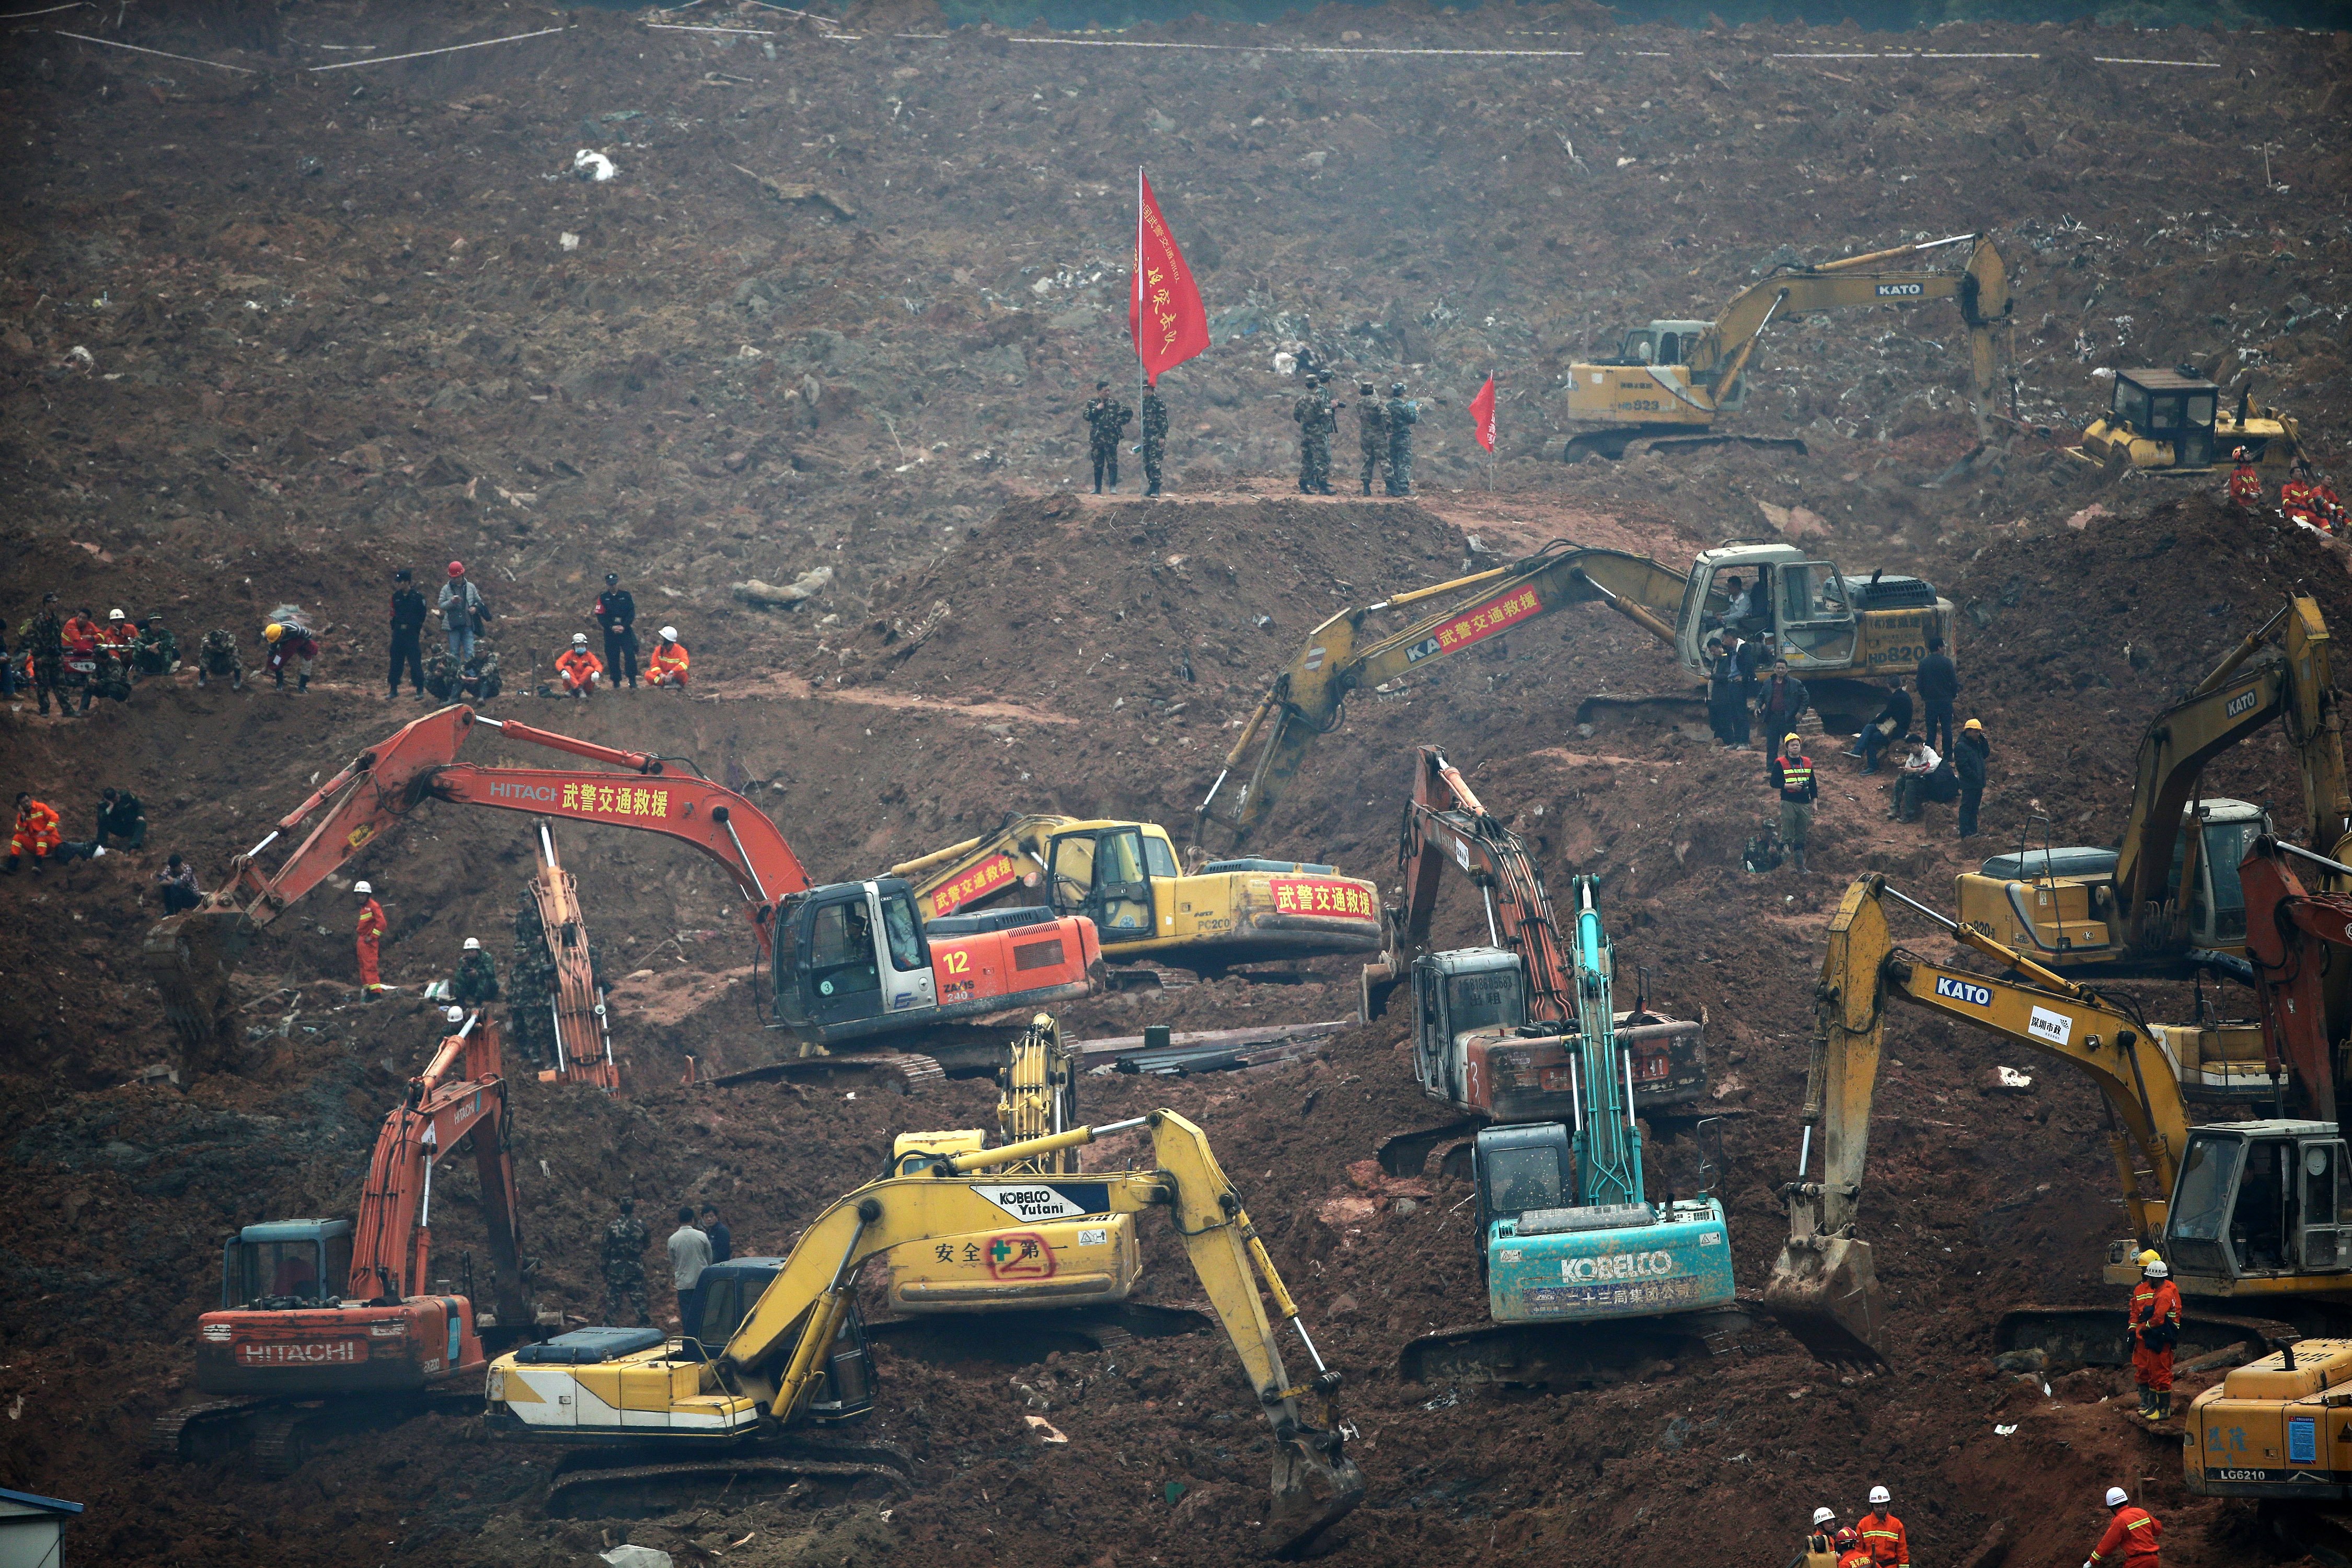 Rescuers using machinery to search for potential survivors, following a landslide in Shenzhen, in south China's Guangdong province, Monday, Dec. 21, 2015. A mountain of excavated soil and construction waste buried dozens of buildings when it swept through an industrial park Sunday. (AP Photo/Andy Wong)